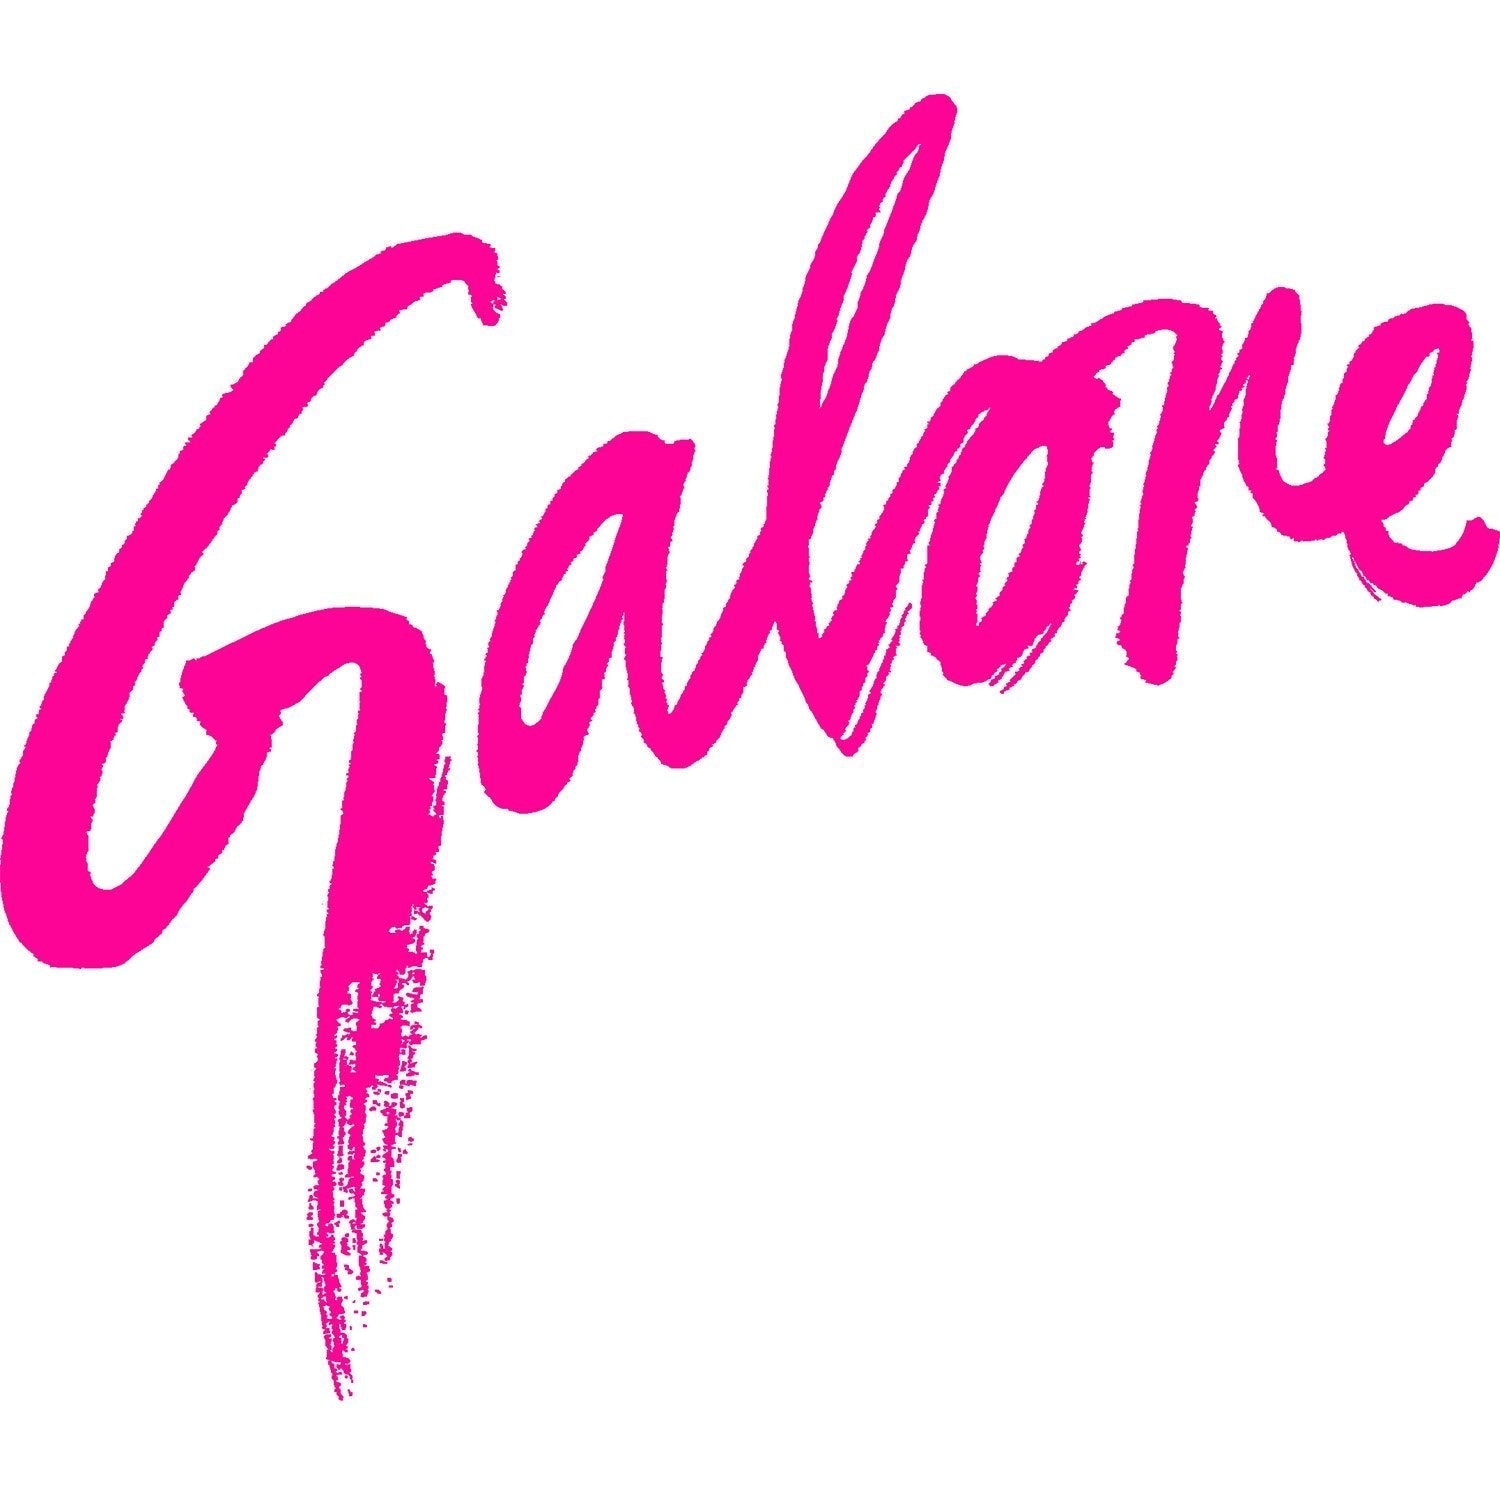 Galore Features Sun + Sweat - SAVE ME FROM